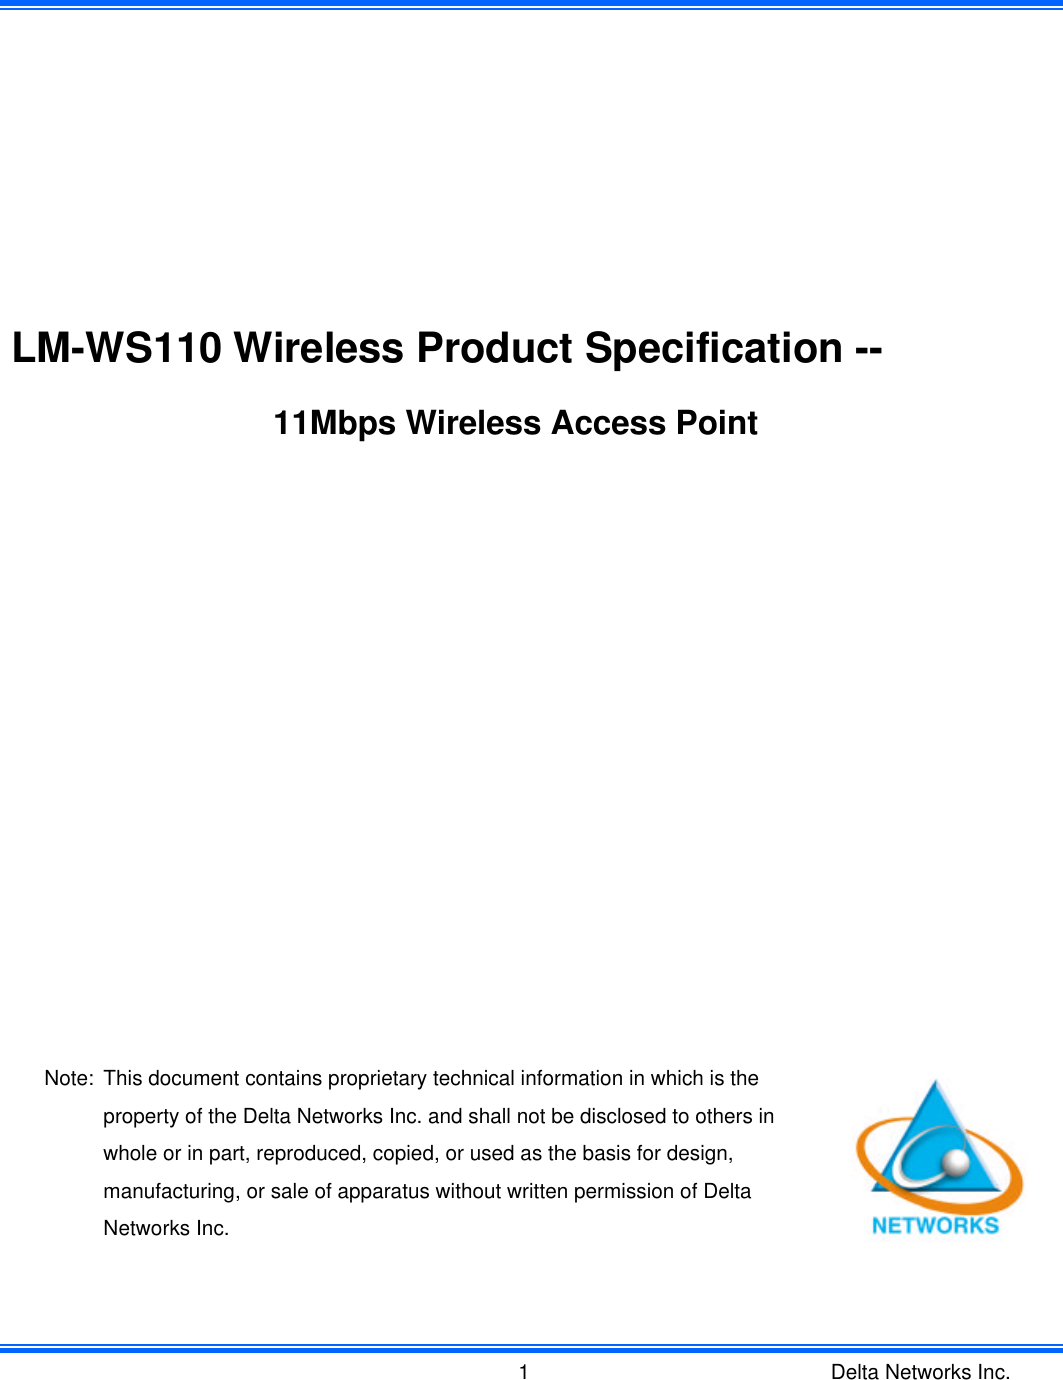  Delta Networks Inc. 1         LM-WS110 Wireless Product Specification --  11Mbps Wireless Access Point                 Note: This document contains proprietary technical information in which is the property of the Delta Networks Inc. and shall not be disclosed to others in whole or in part, reproduced, copied, or used as the basis for design, manufacturing, or sale of apparatus without written permission of Delta Networks Inc.  